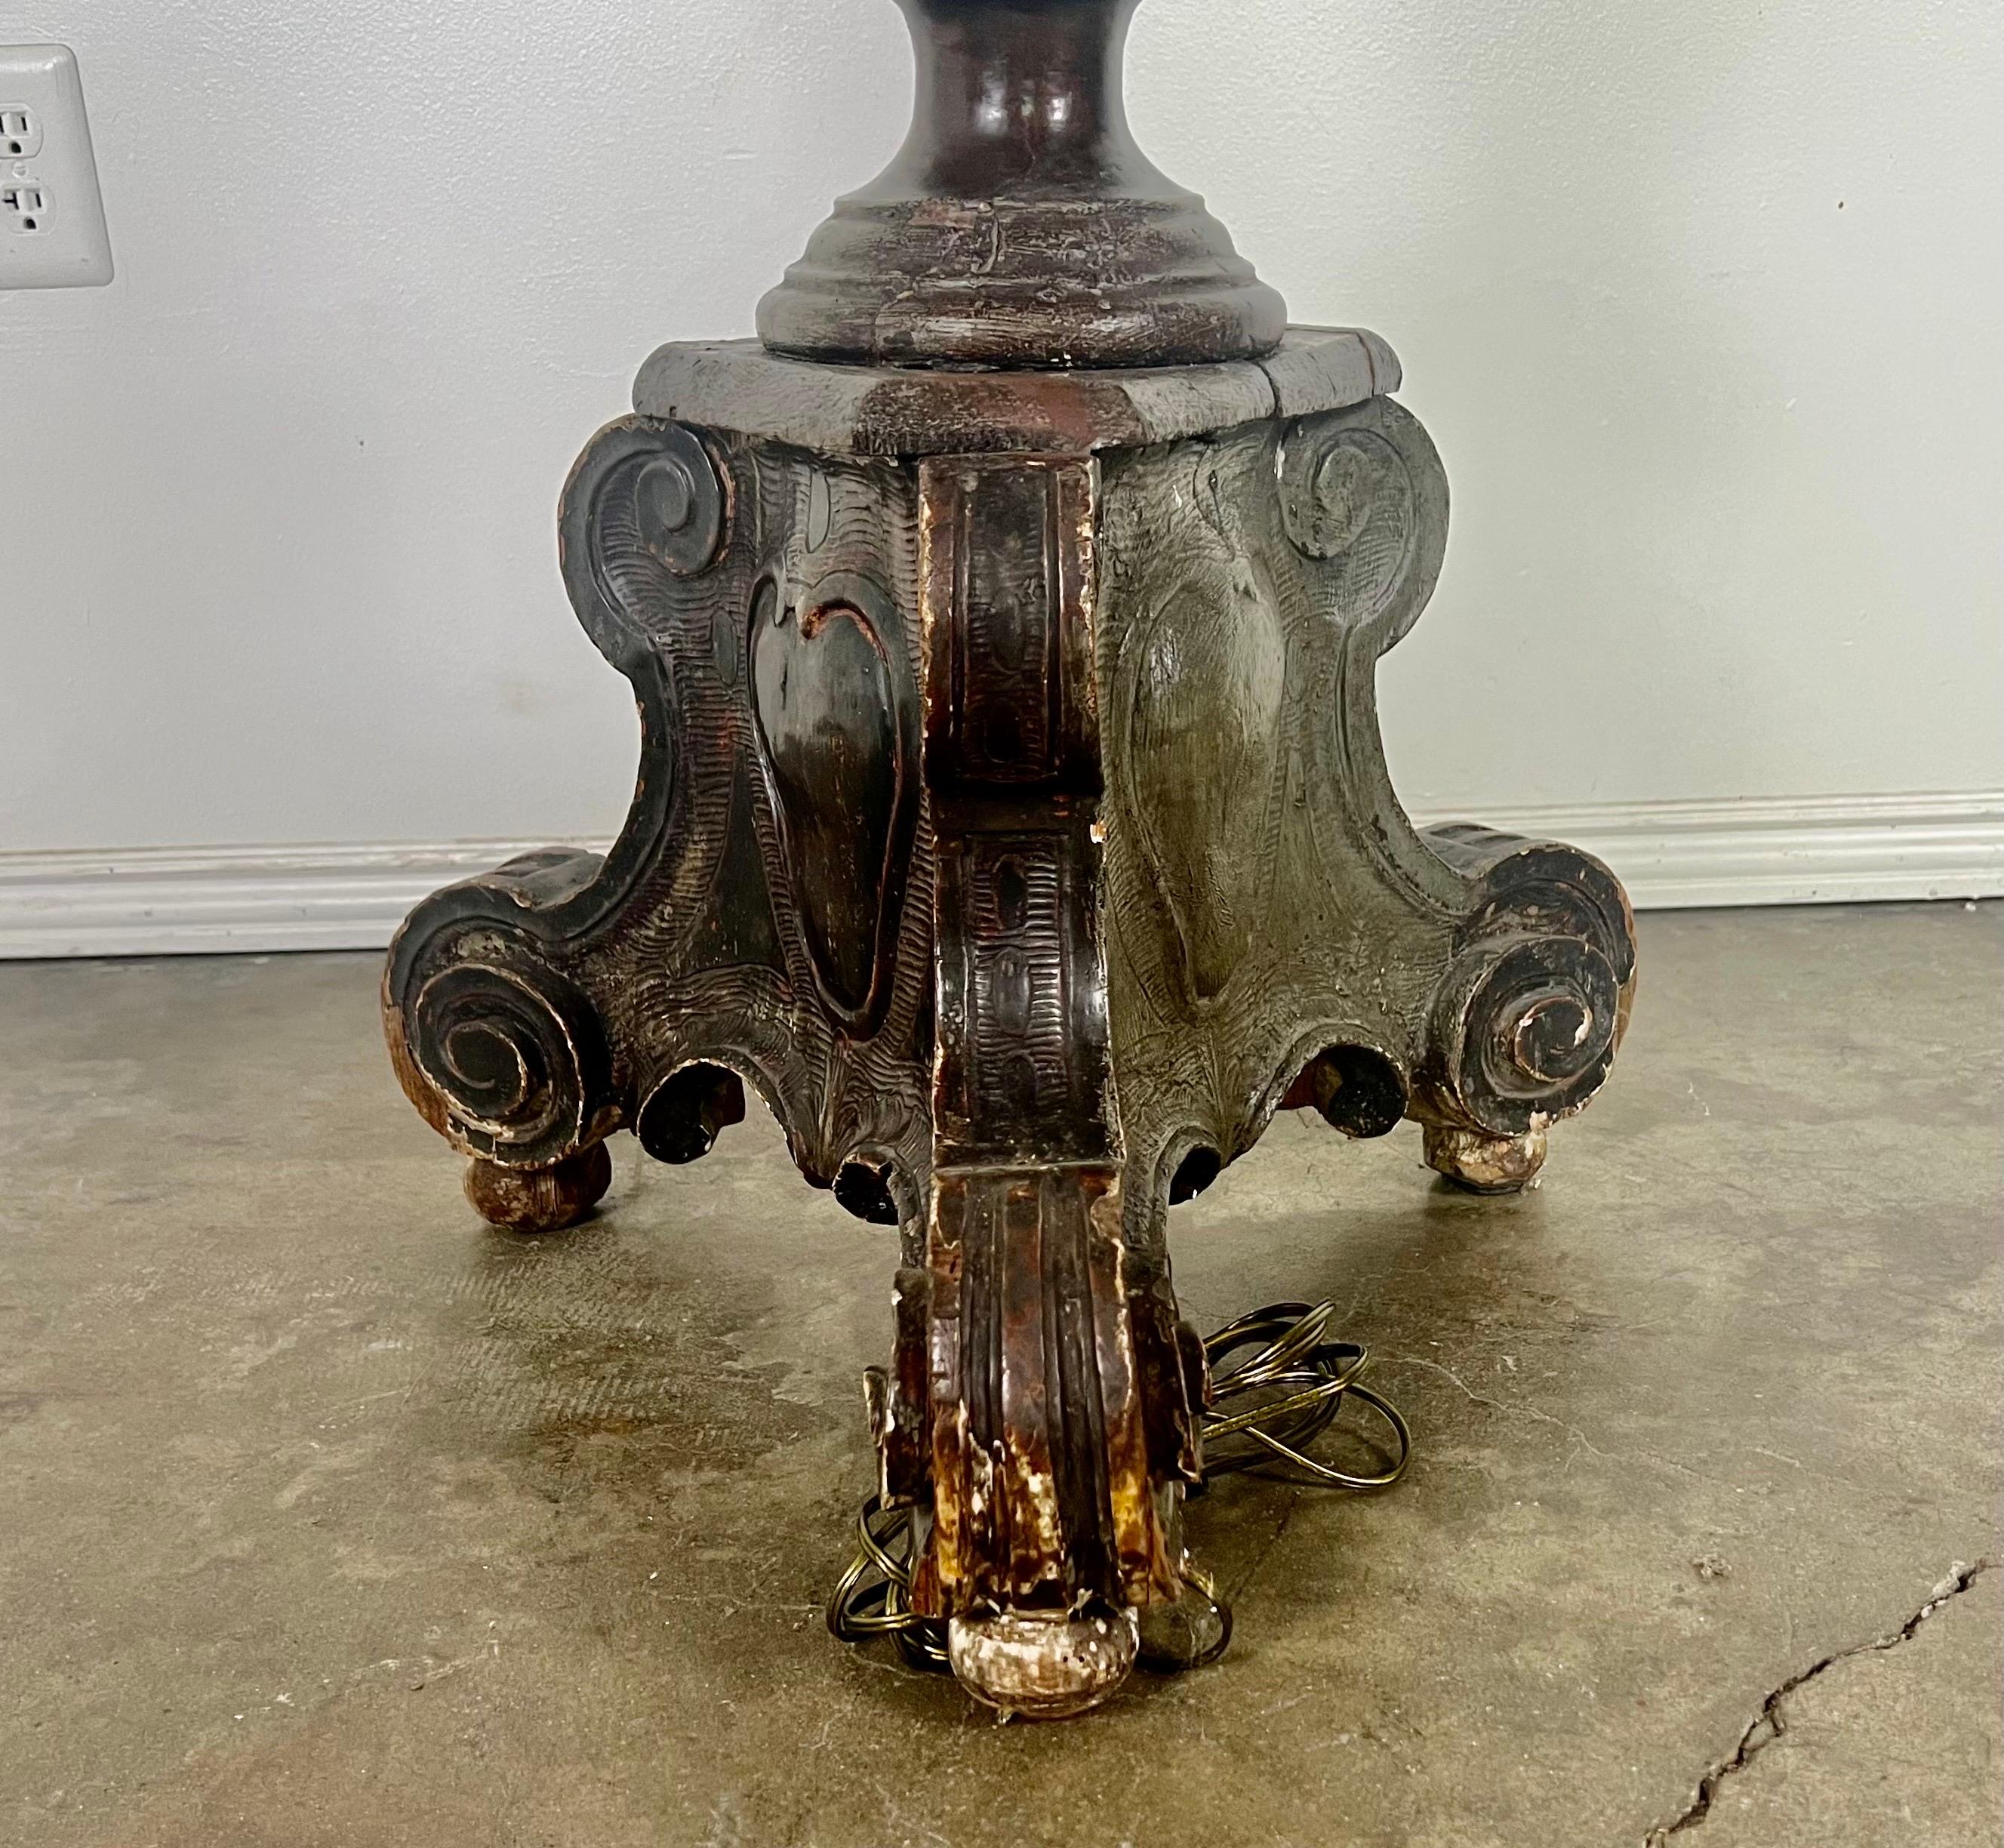 19th C. Italian walnut turned and carved standing lamp.  The lamp has a tripod base and has a carved heart on each side.  The lamp is wired and in working condition.